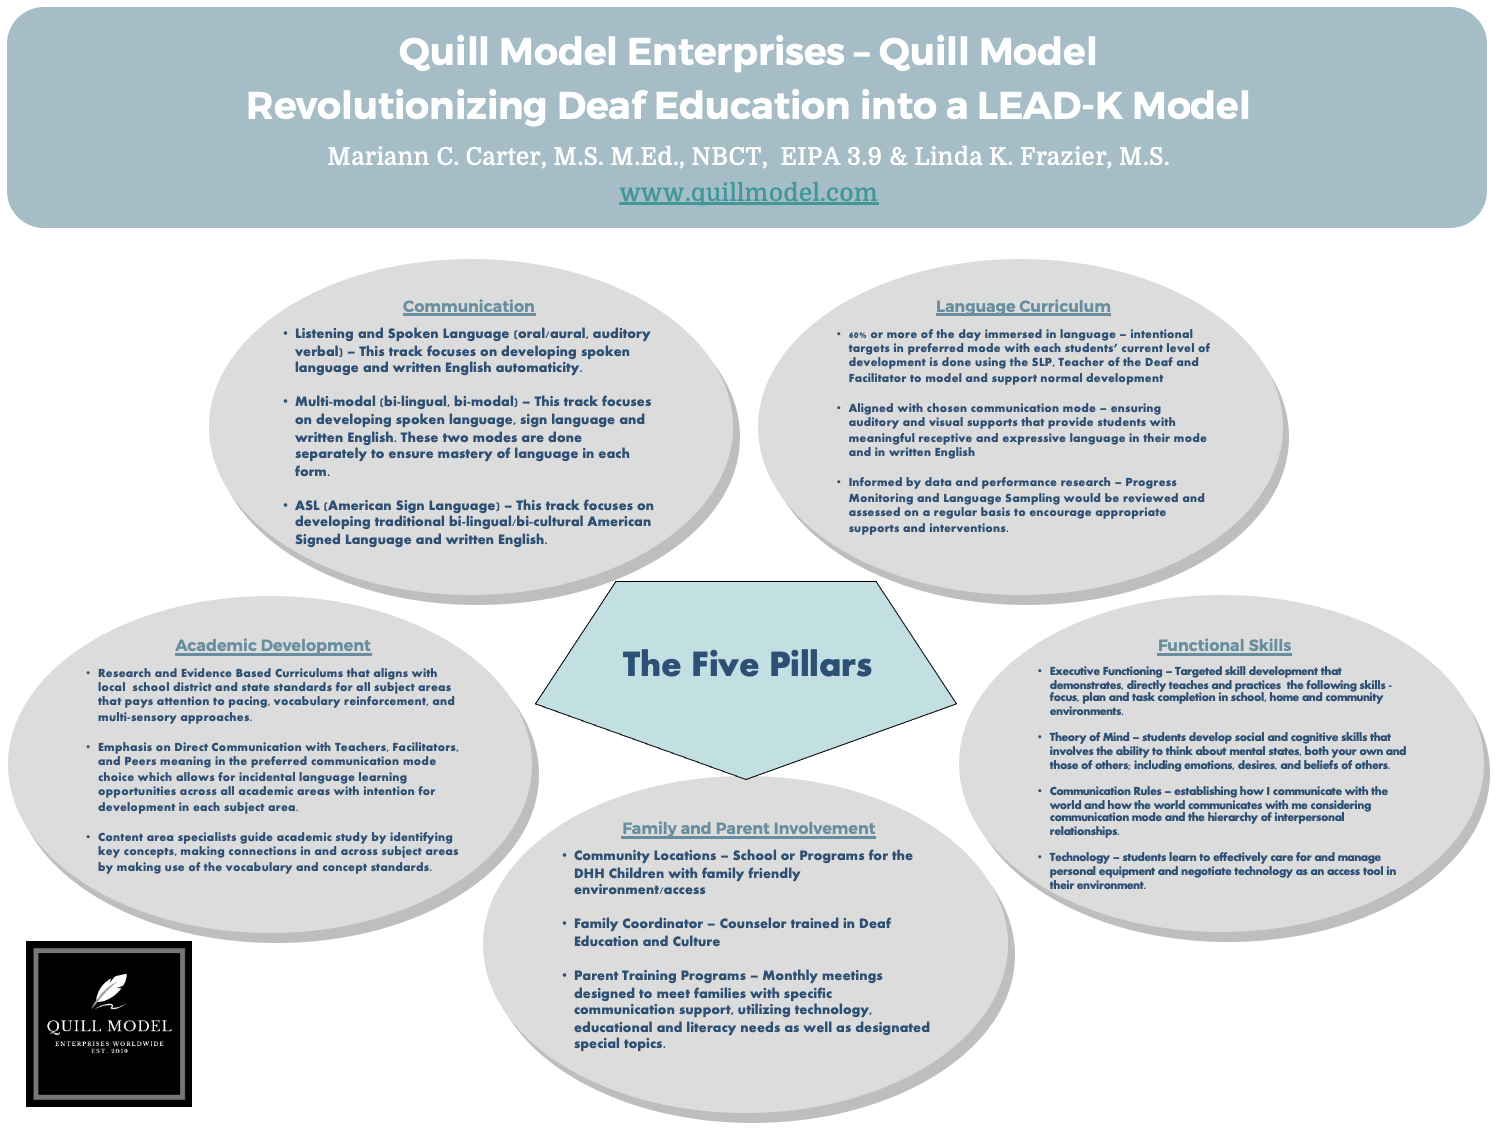 Showcase Image for The Quill Model - A Radical Approach to Deaf Education